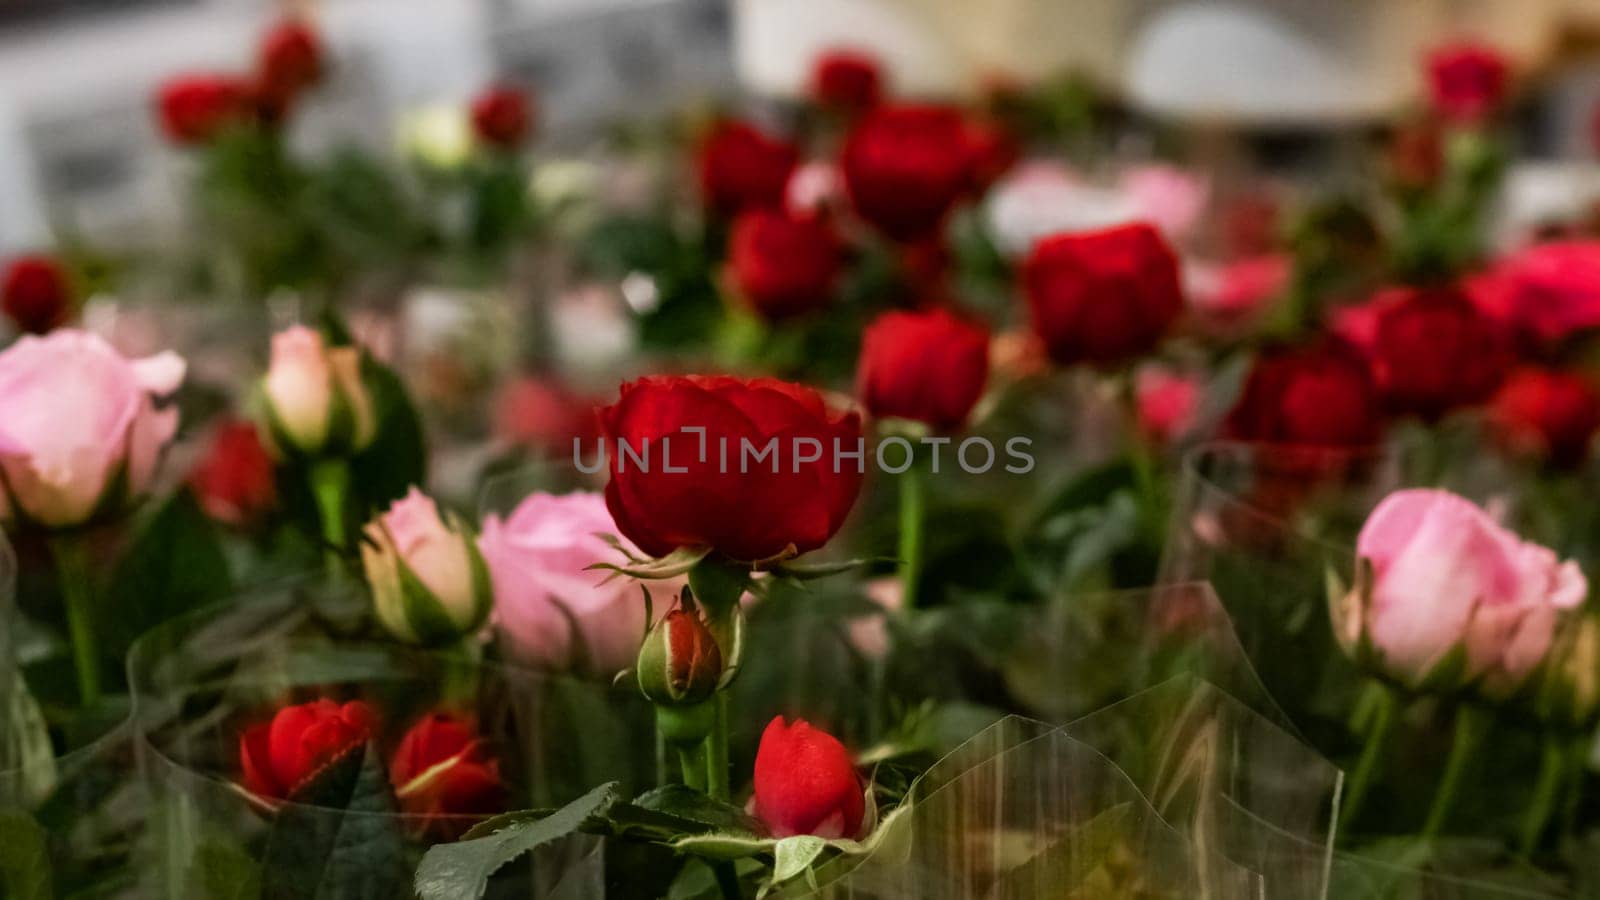 Red and pink roses close up background by Vera1703